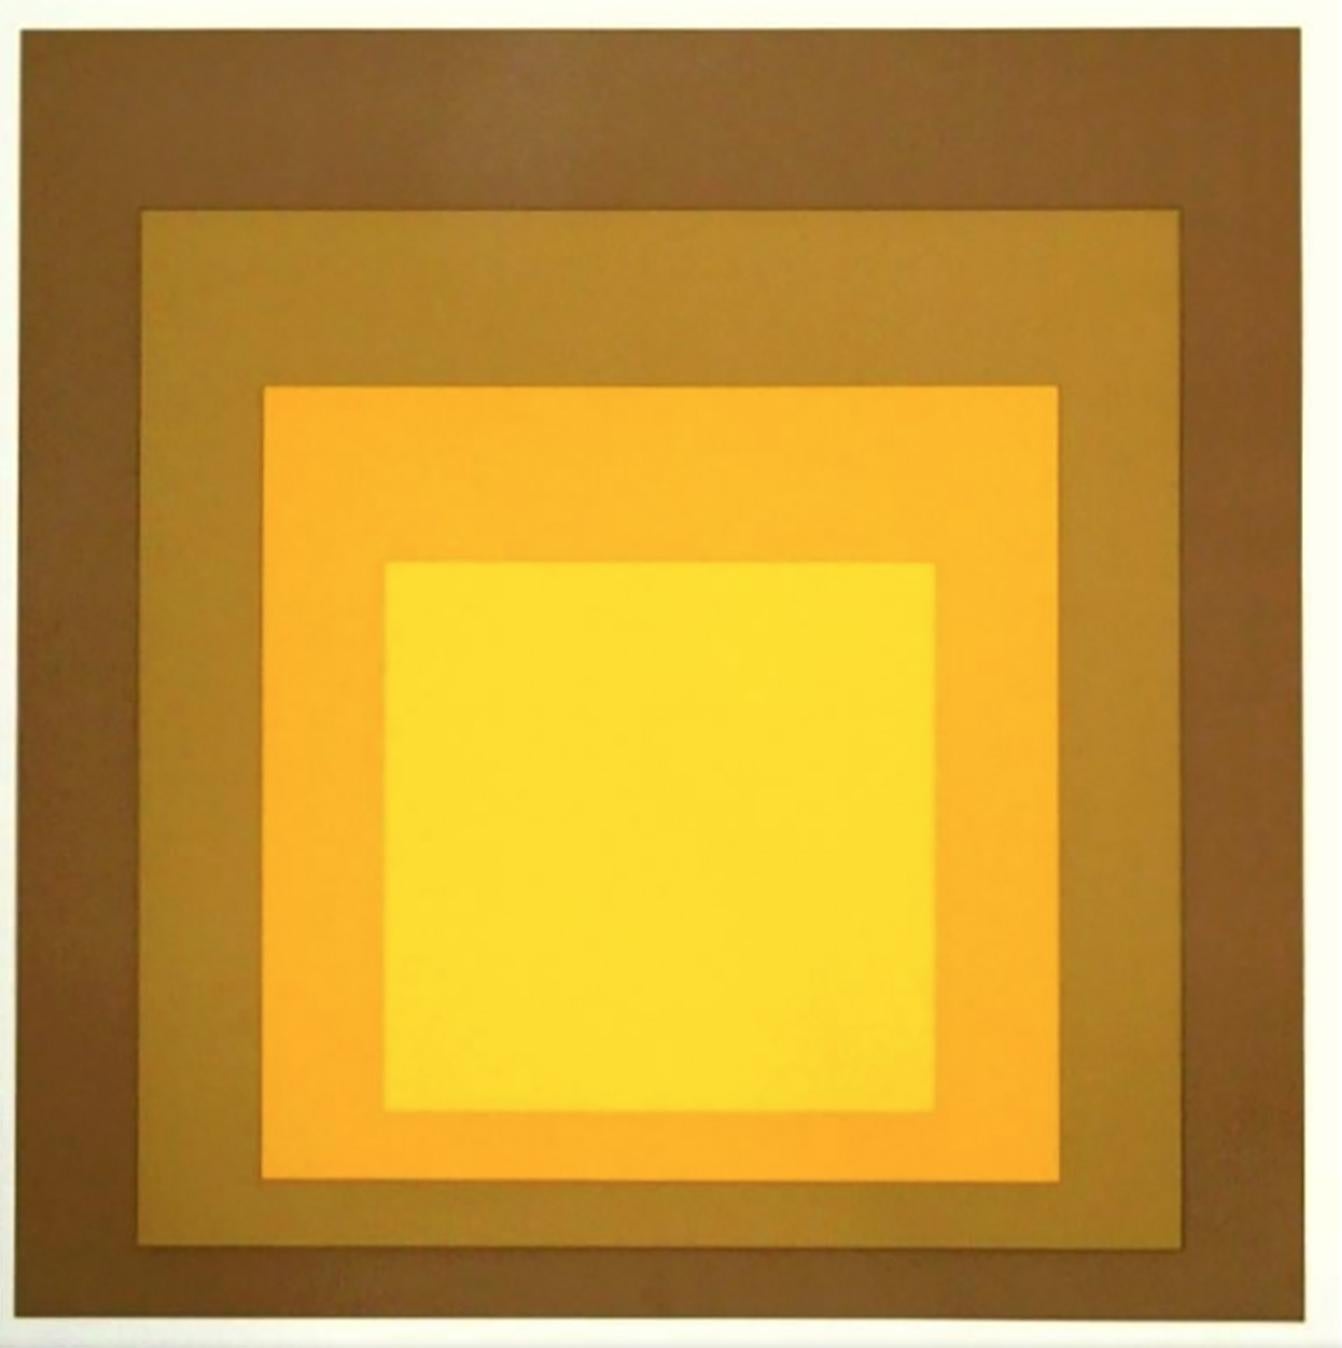 (after) Josef Albers Abstract Print - Josef Albers Homage to the Square poster (Albers prints)